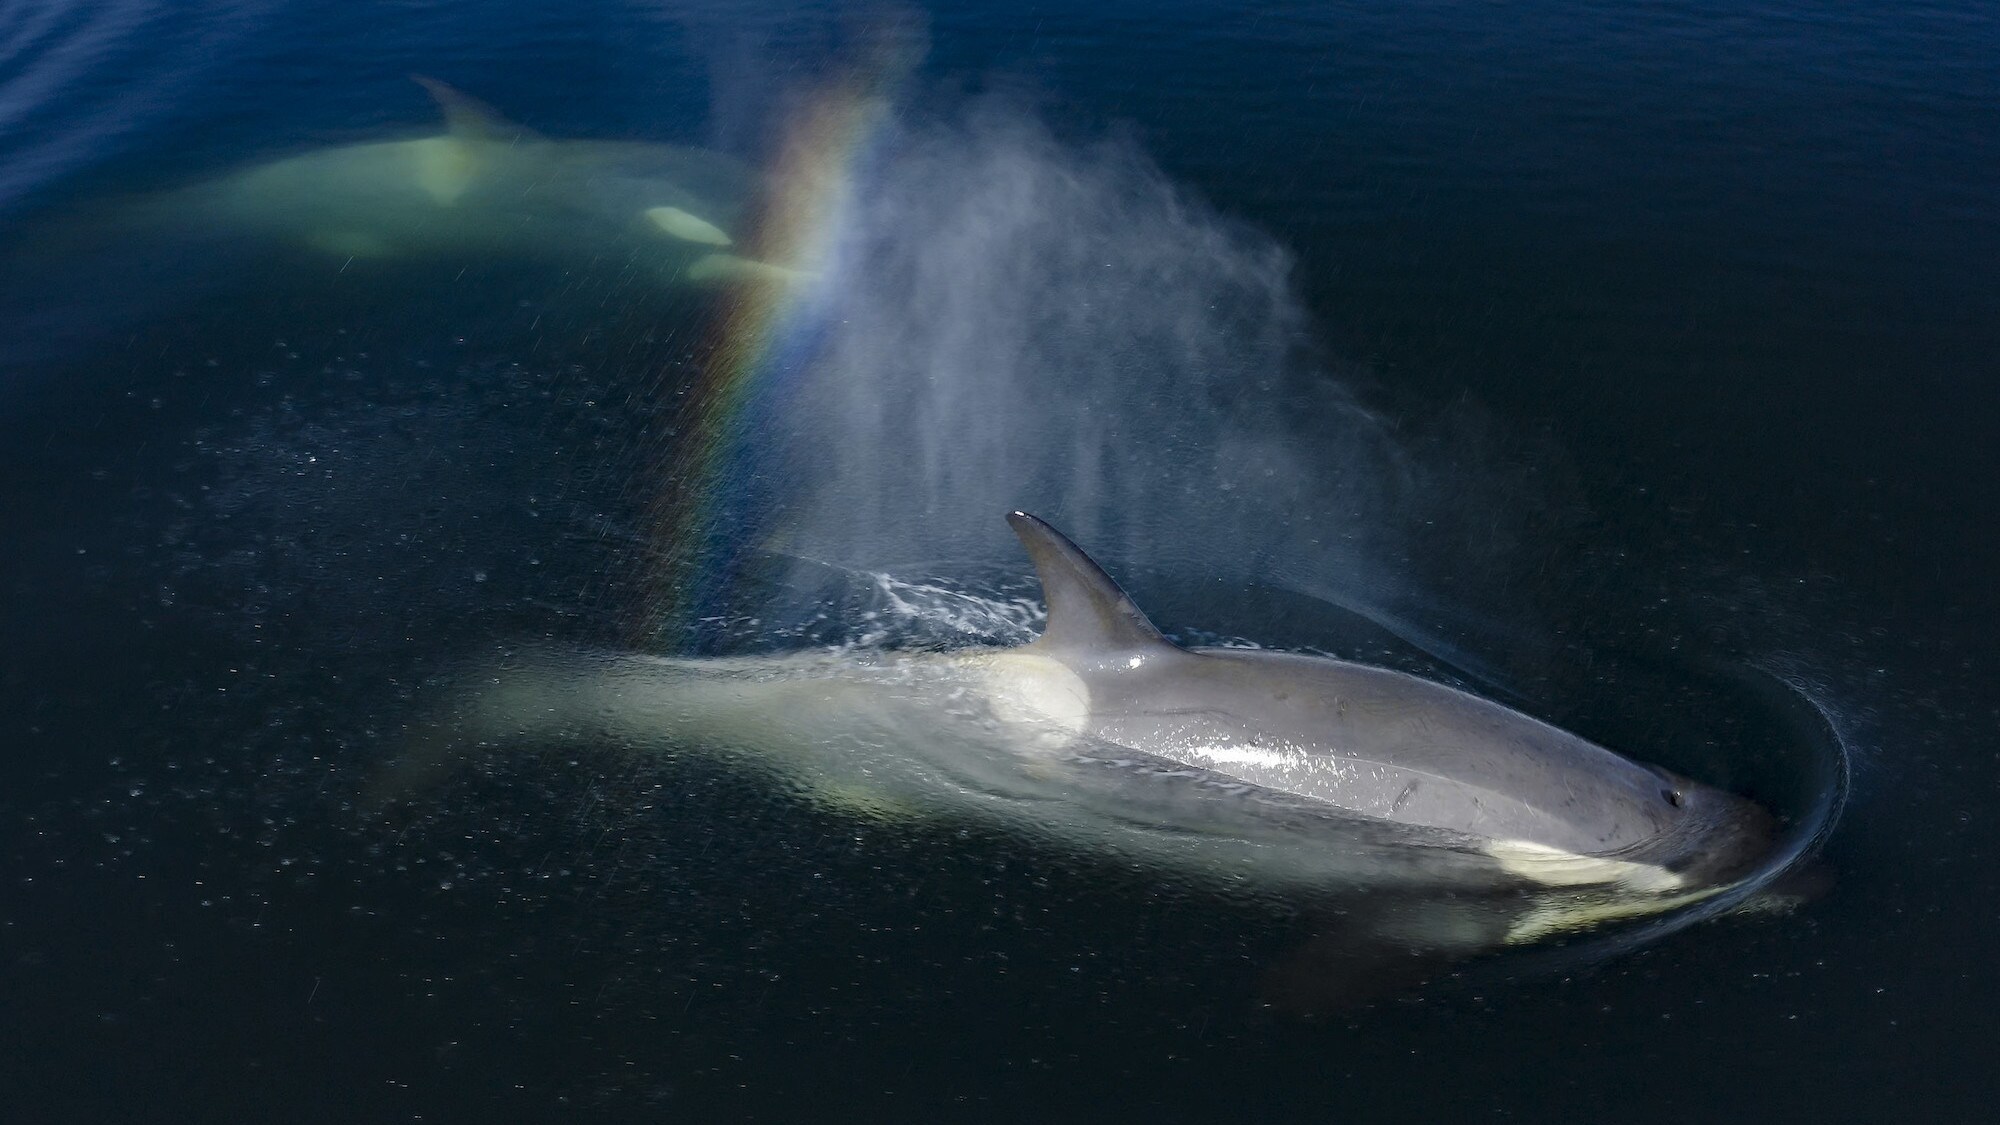 Two killer whales, one just underneath the surface and the other on top with a rainbow light glinting through the water. (credit: National Geographic for Disney+/Bertie Gregory)